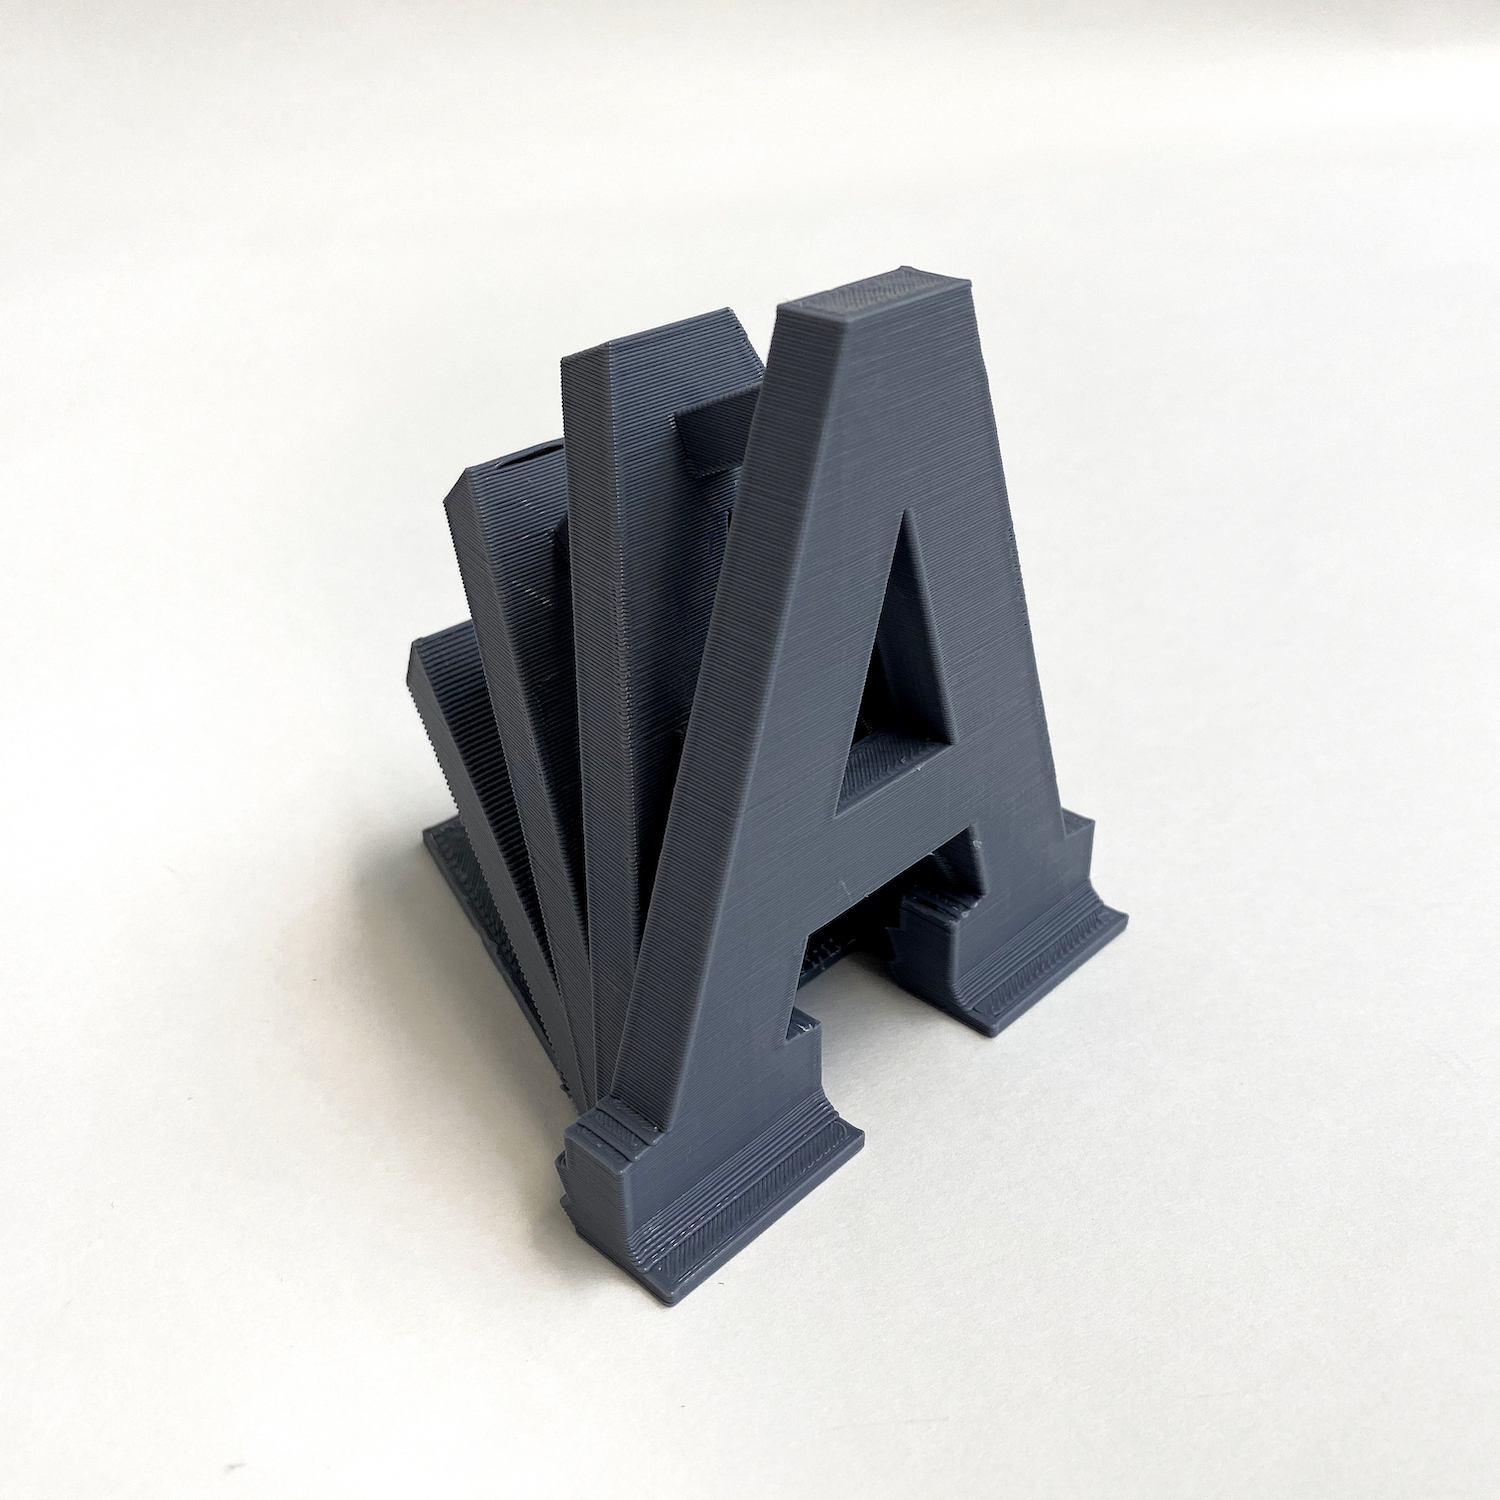 The letter A, standing up strong with echoes of itself appearing to fall behind it. It is printed in a grey color.